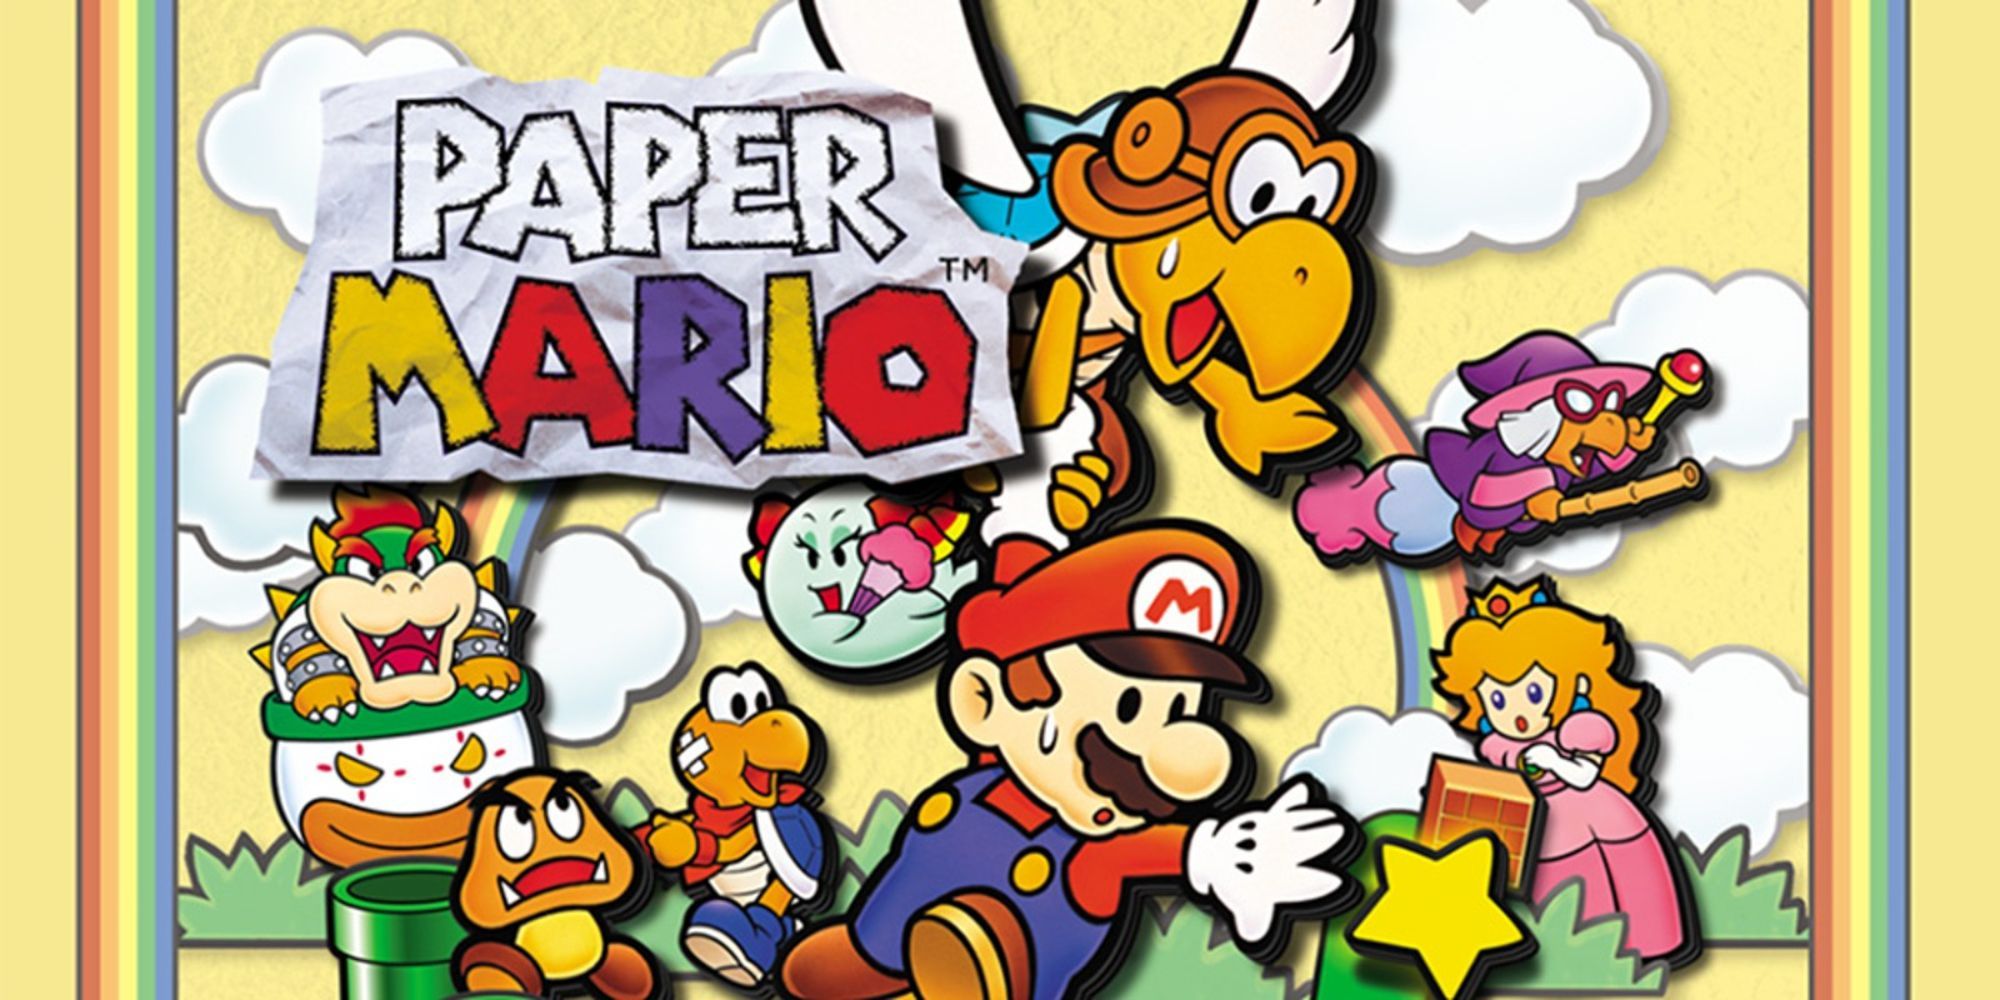 Mario holding onto Koopa in promotional art for Paper Mario